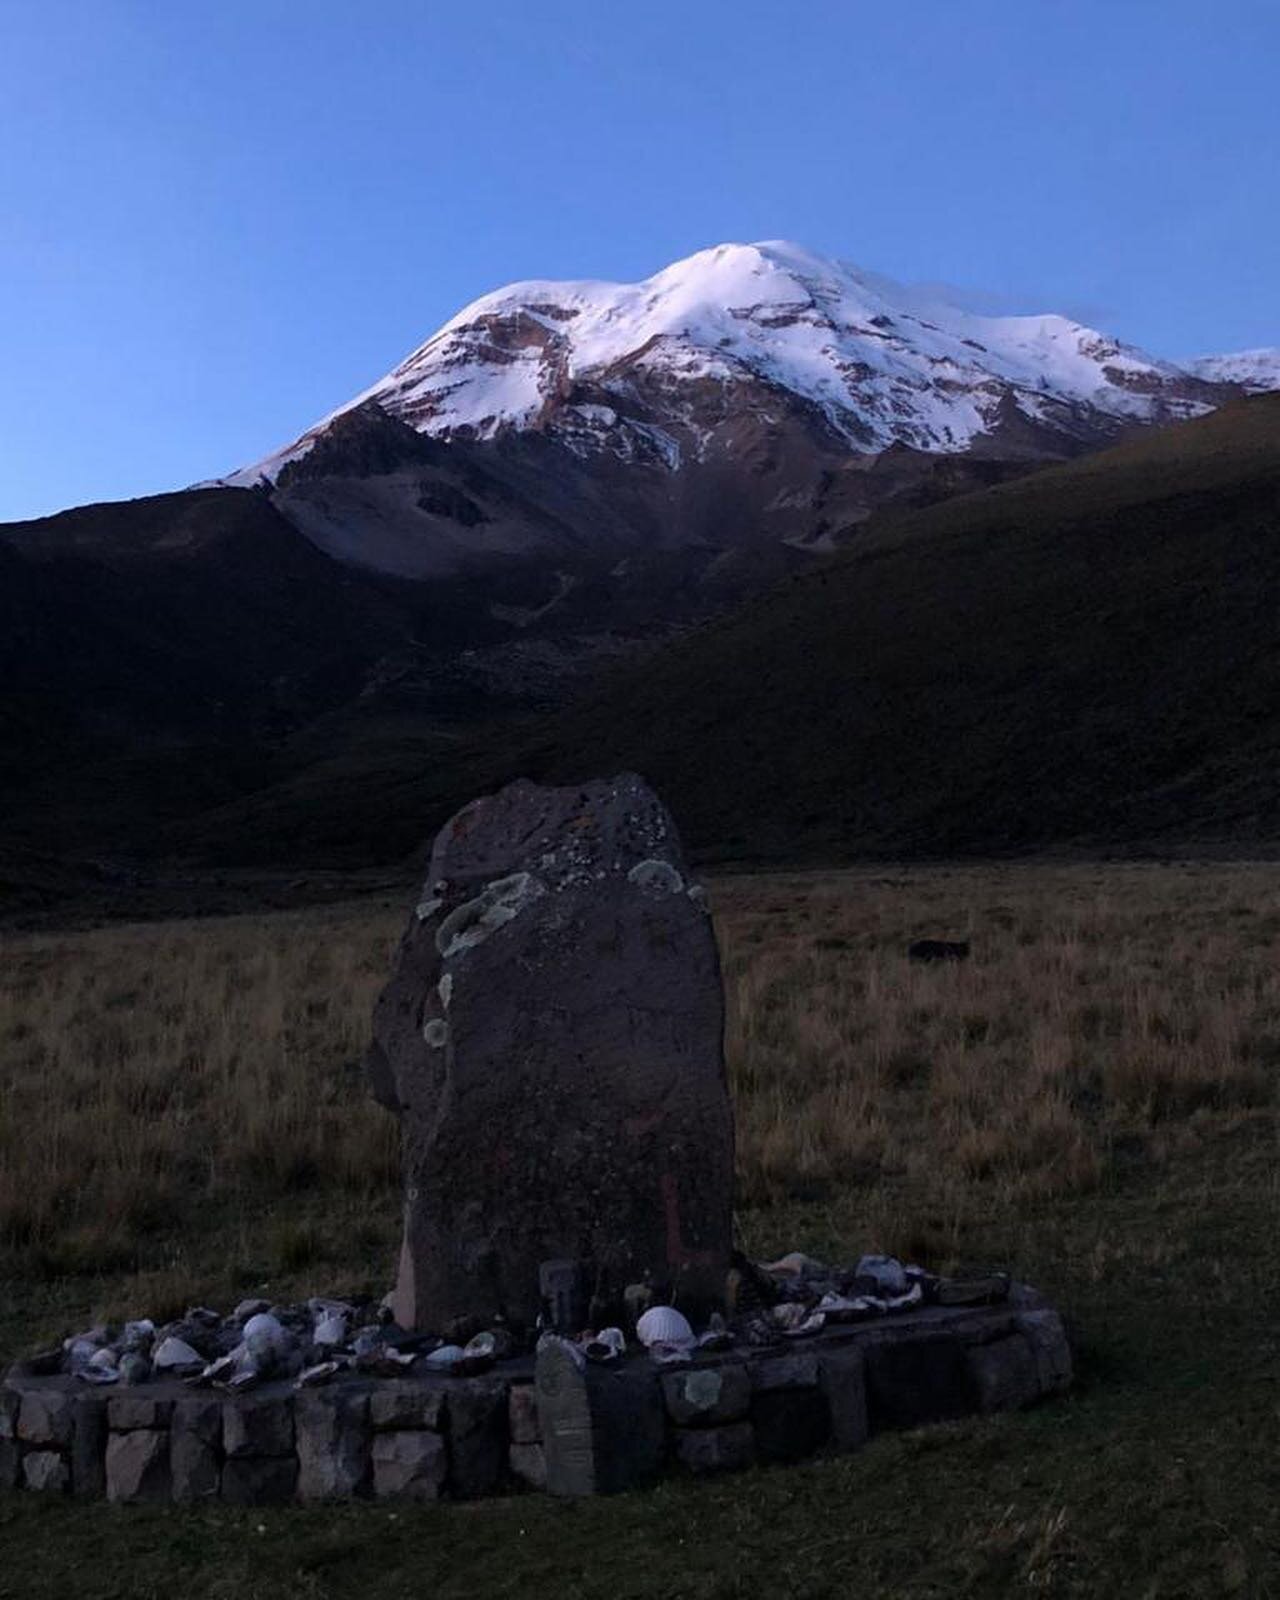 I&rsquo;ve returned to try and climb Chimborazo in Ecuador, the furthest point from the centre of the earth! 
Started today with an acclimatisation hike up to 5,300 metres and a nights sleep at this height!

#mountains #climbing #aclimatisation #chim